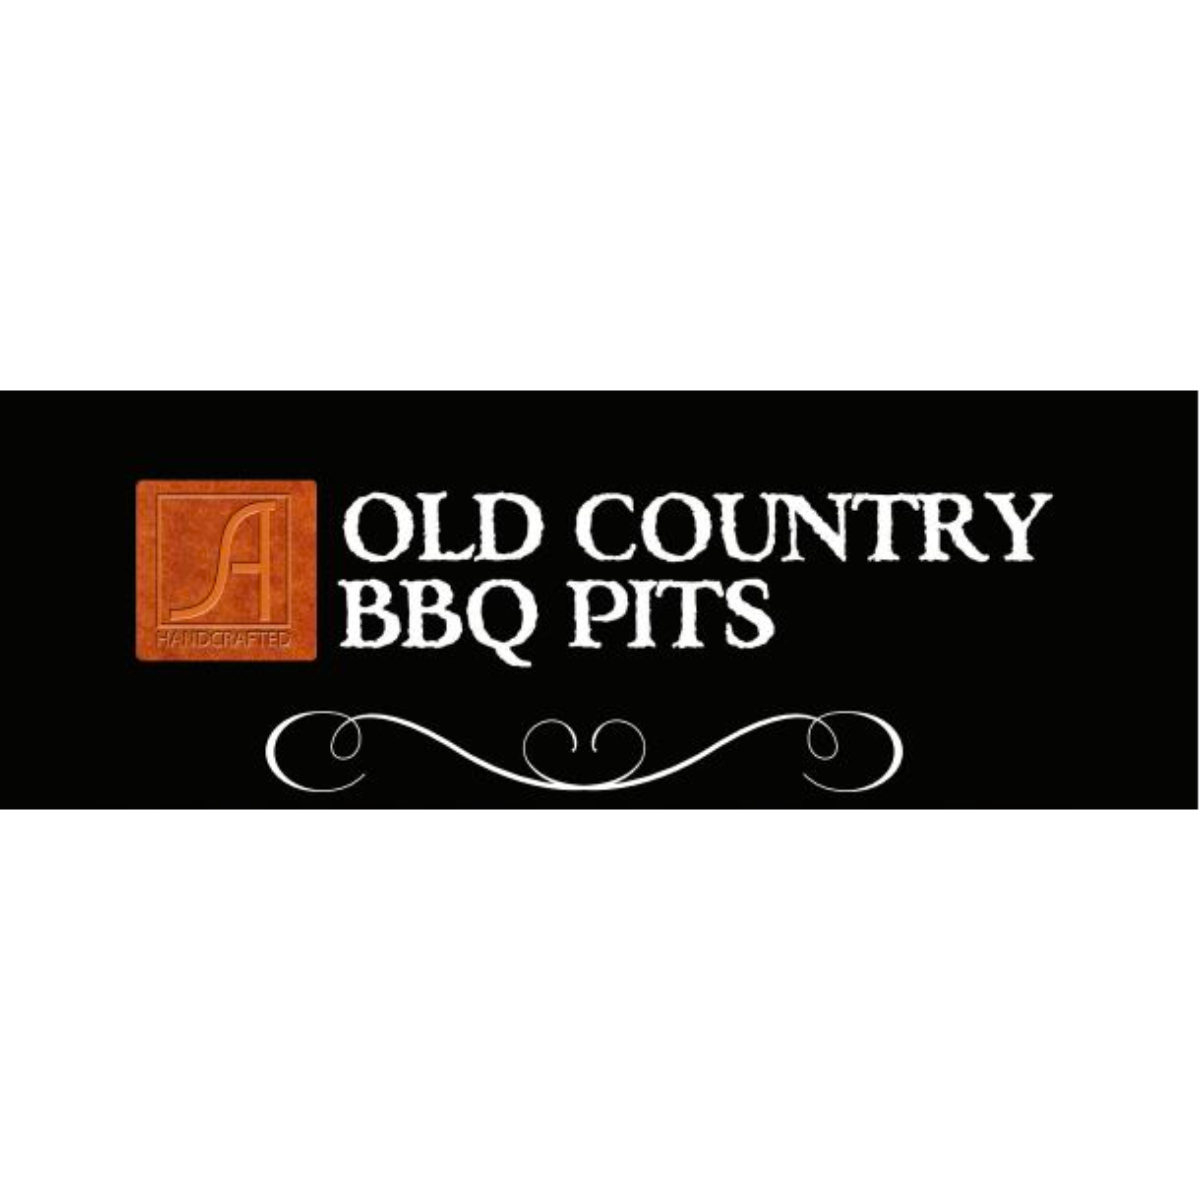 Old Country BBQ Pits